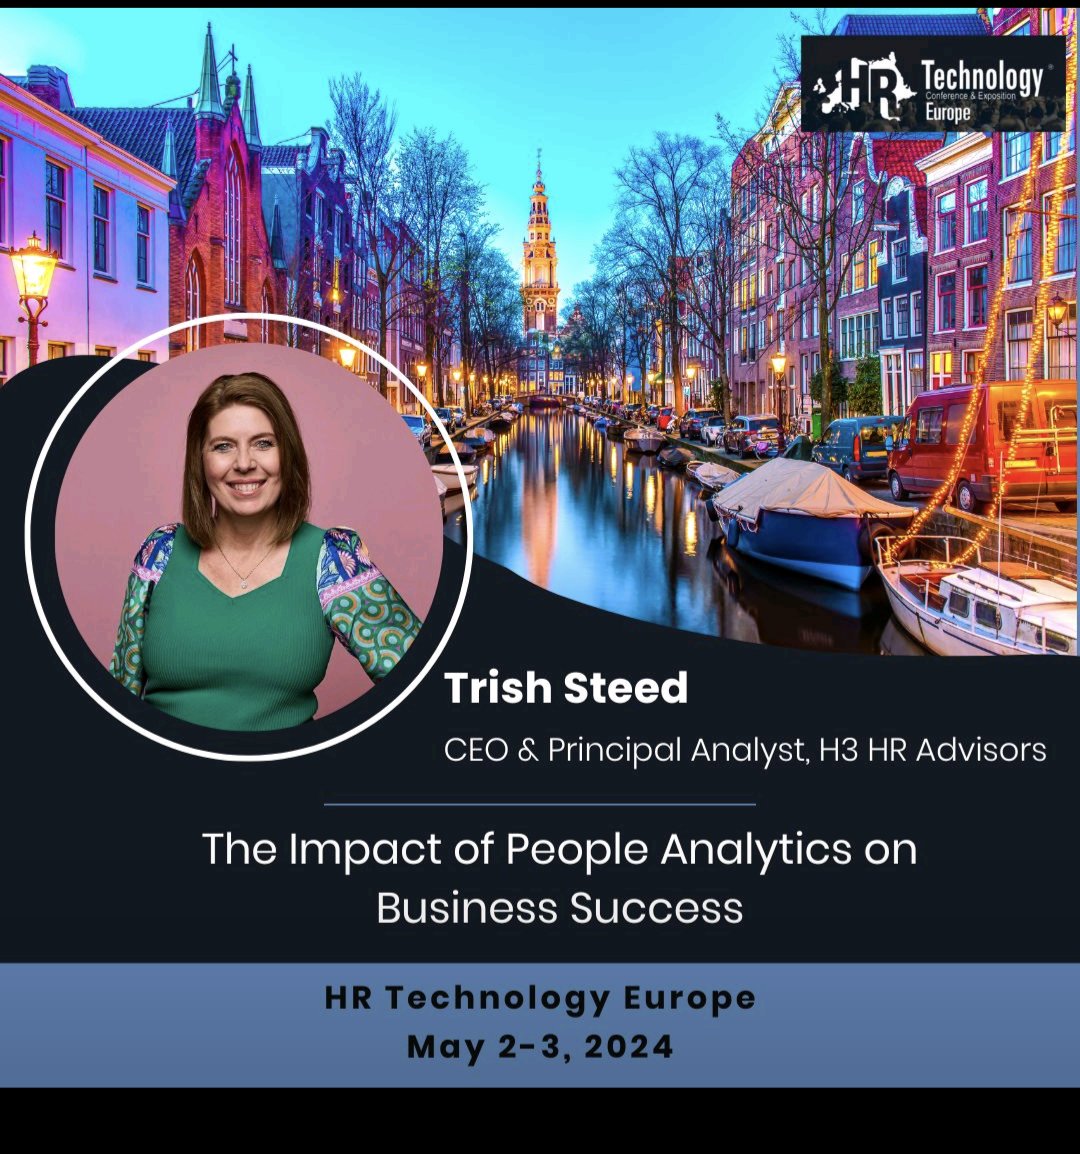 Join me in #Amsterdam May 2-3 for HR Tech Europe. We will talk abt #peopleanalytics & more! 
hrtechnologyeurope.com